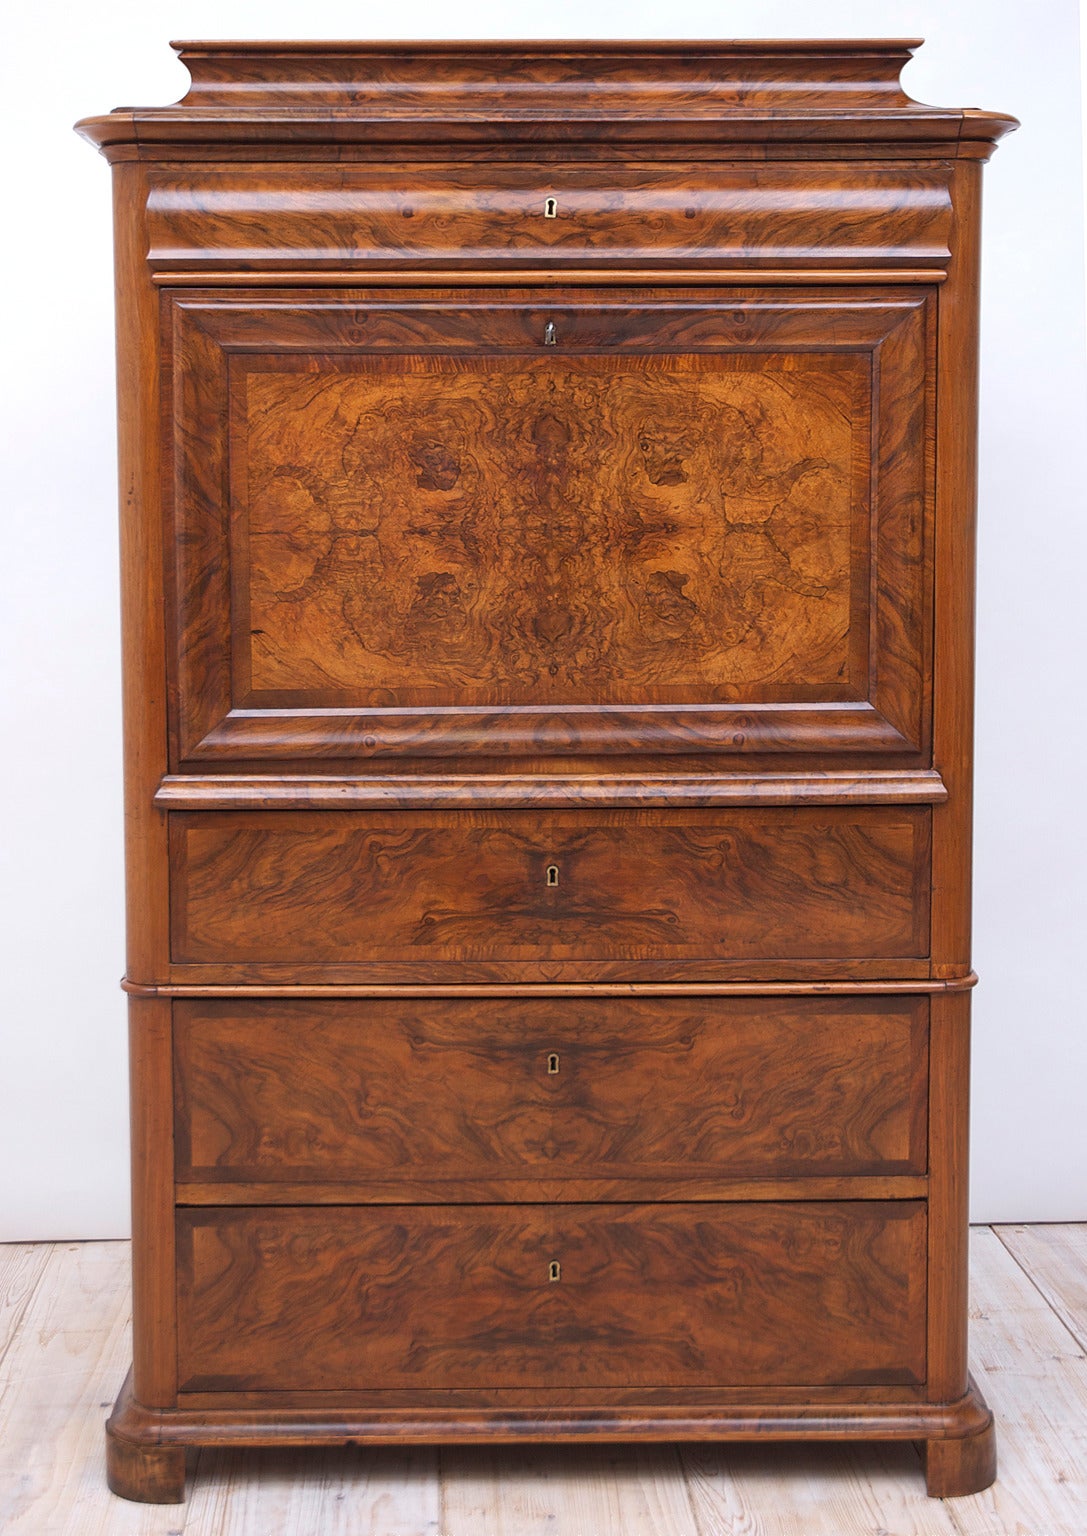 An exceptional Biedermeier Secretary in book-matched figured walnut and burled walnut with one top drawer below pedestal top and three storage drawers of staggered depths below desk surface. Fall-front opens to a small central cabinet with a drawer